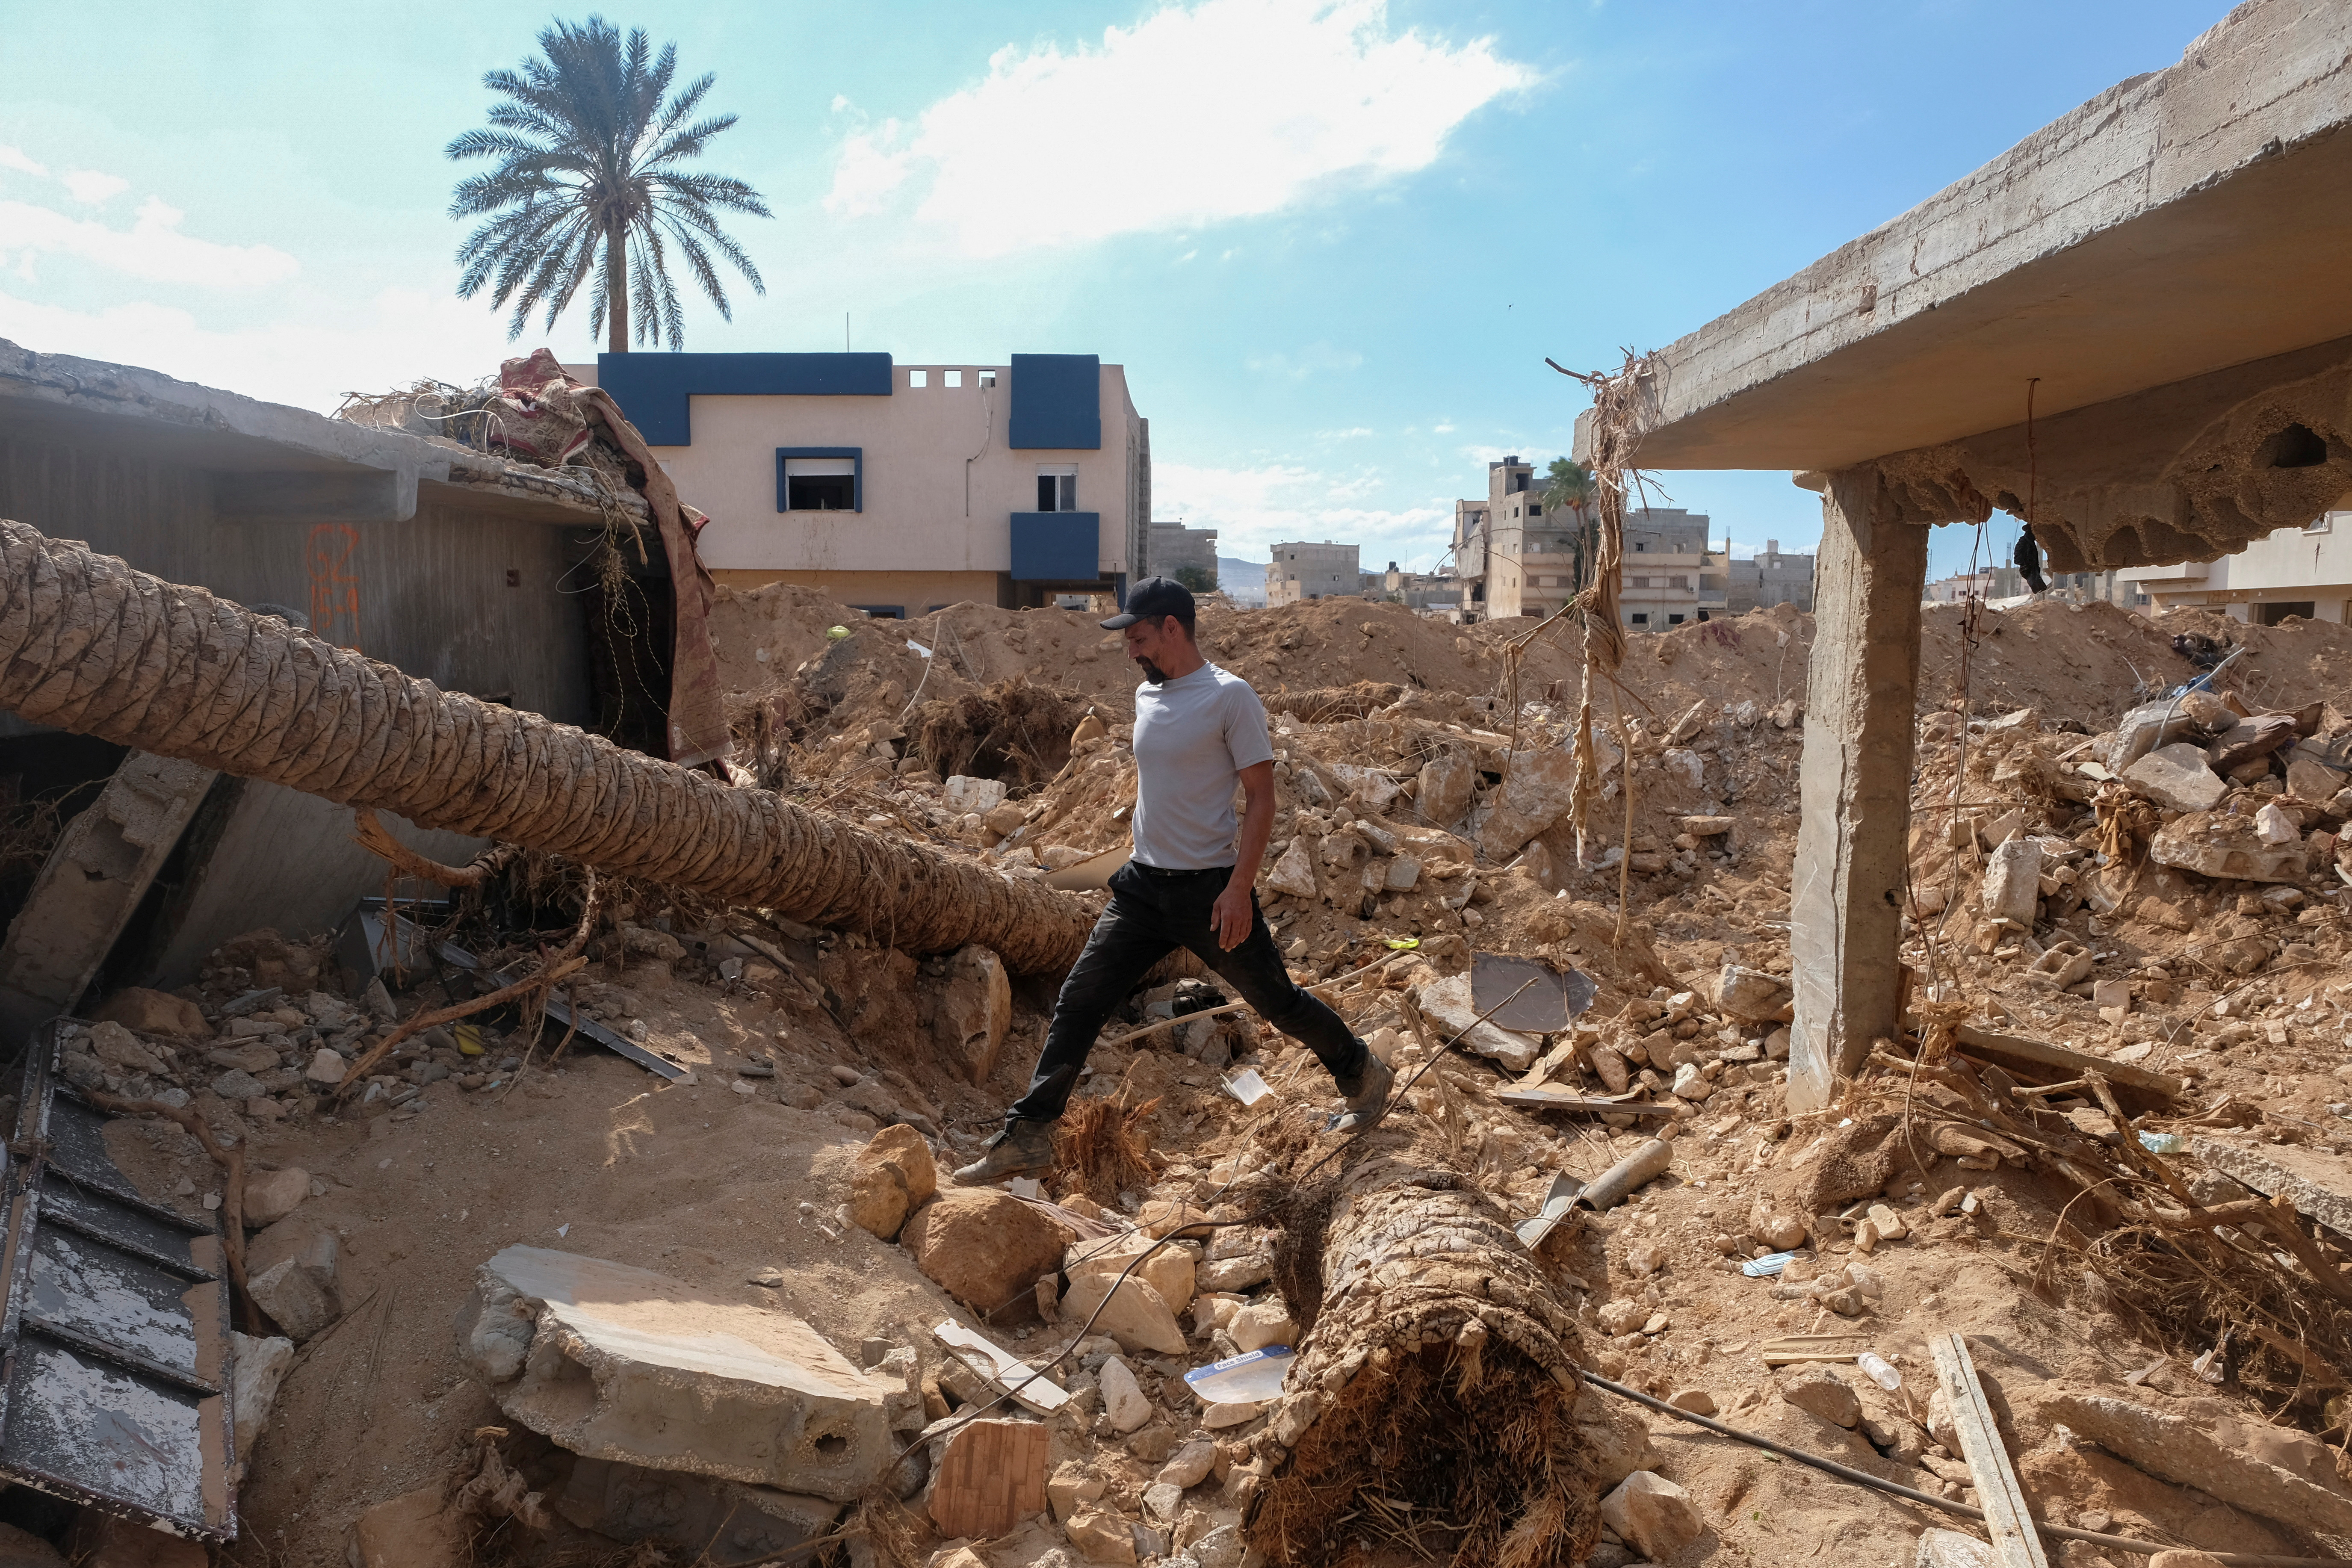 Abdul Salam Ibrahim Al-Qadi, 43 years old, walks on the rubble in front of his house, searching for his missing father and brother after the deadly floods in Derna